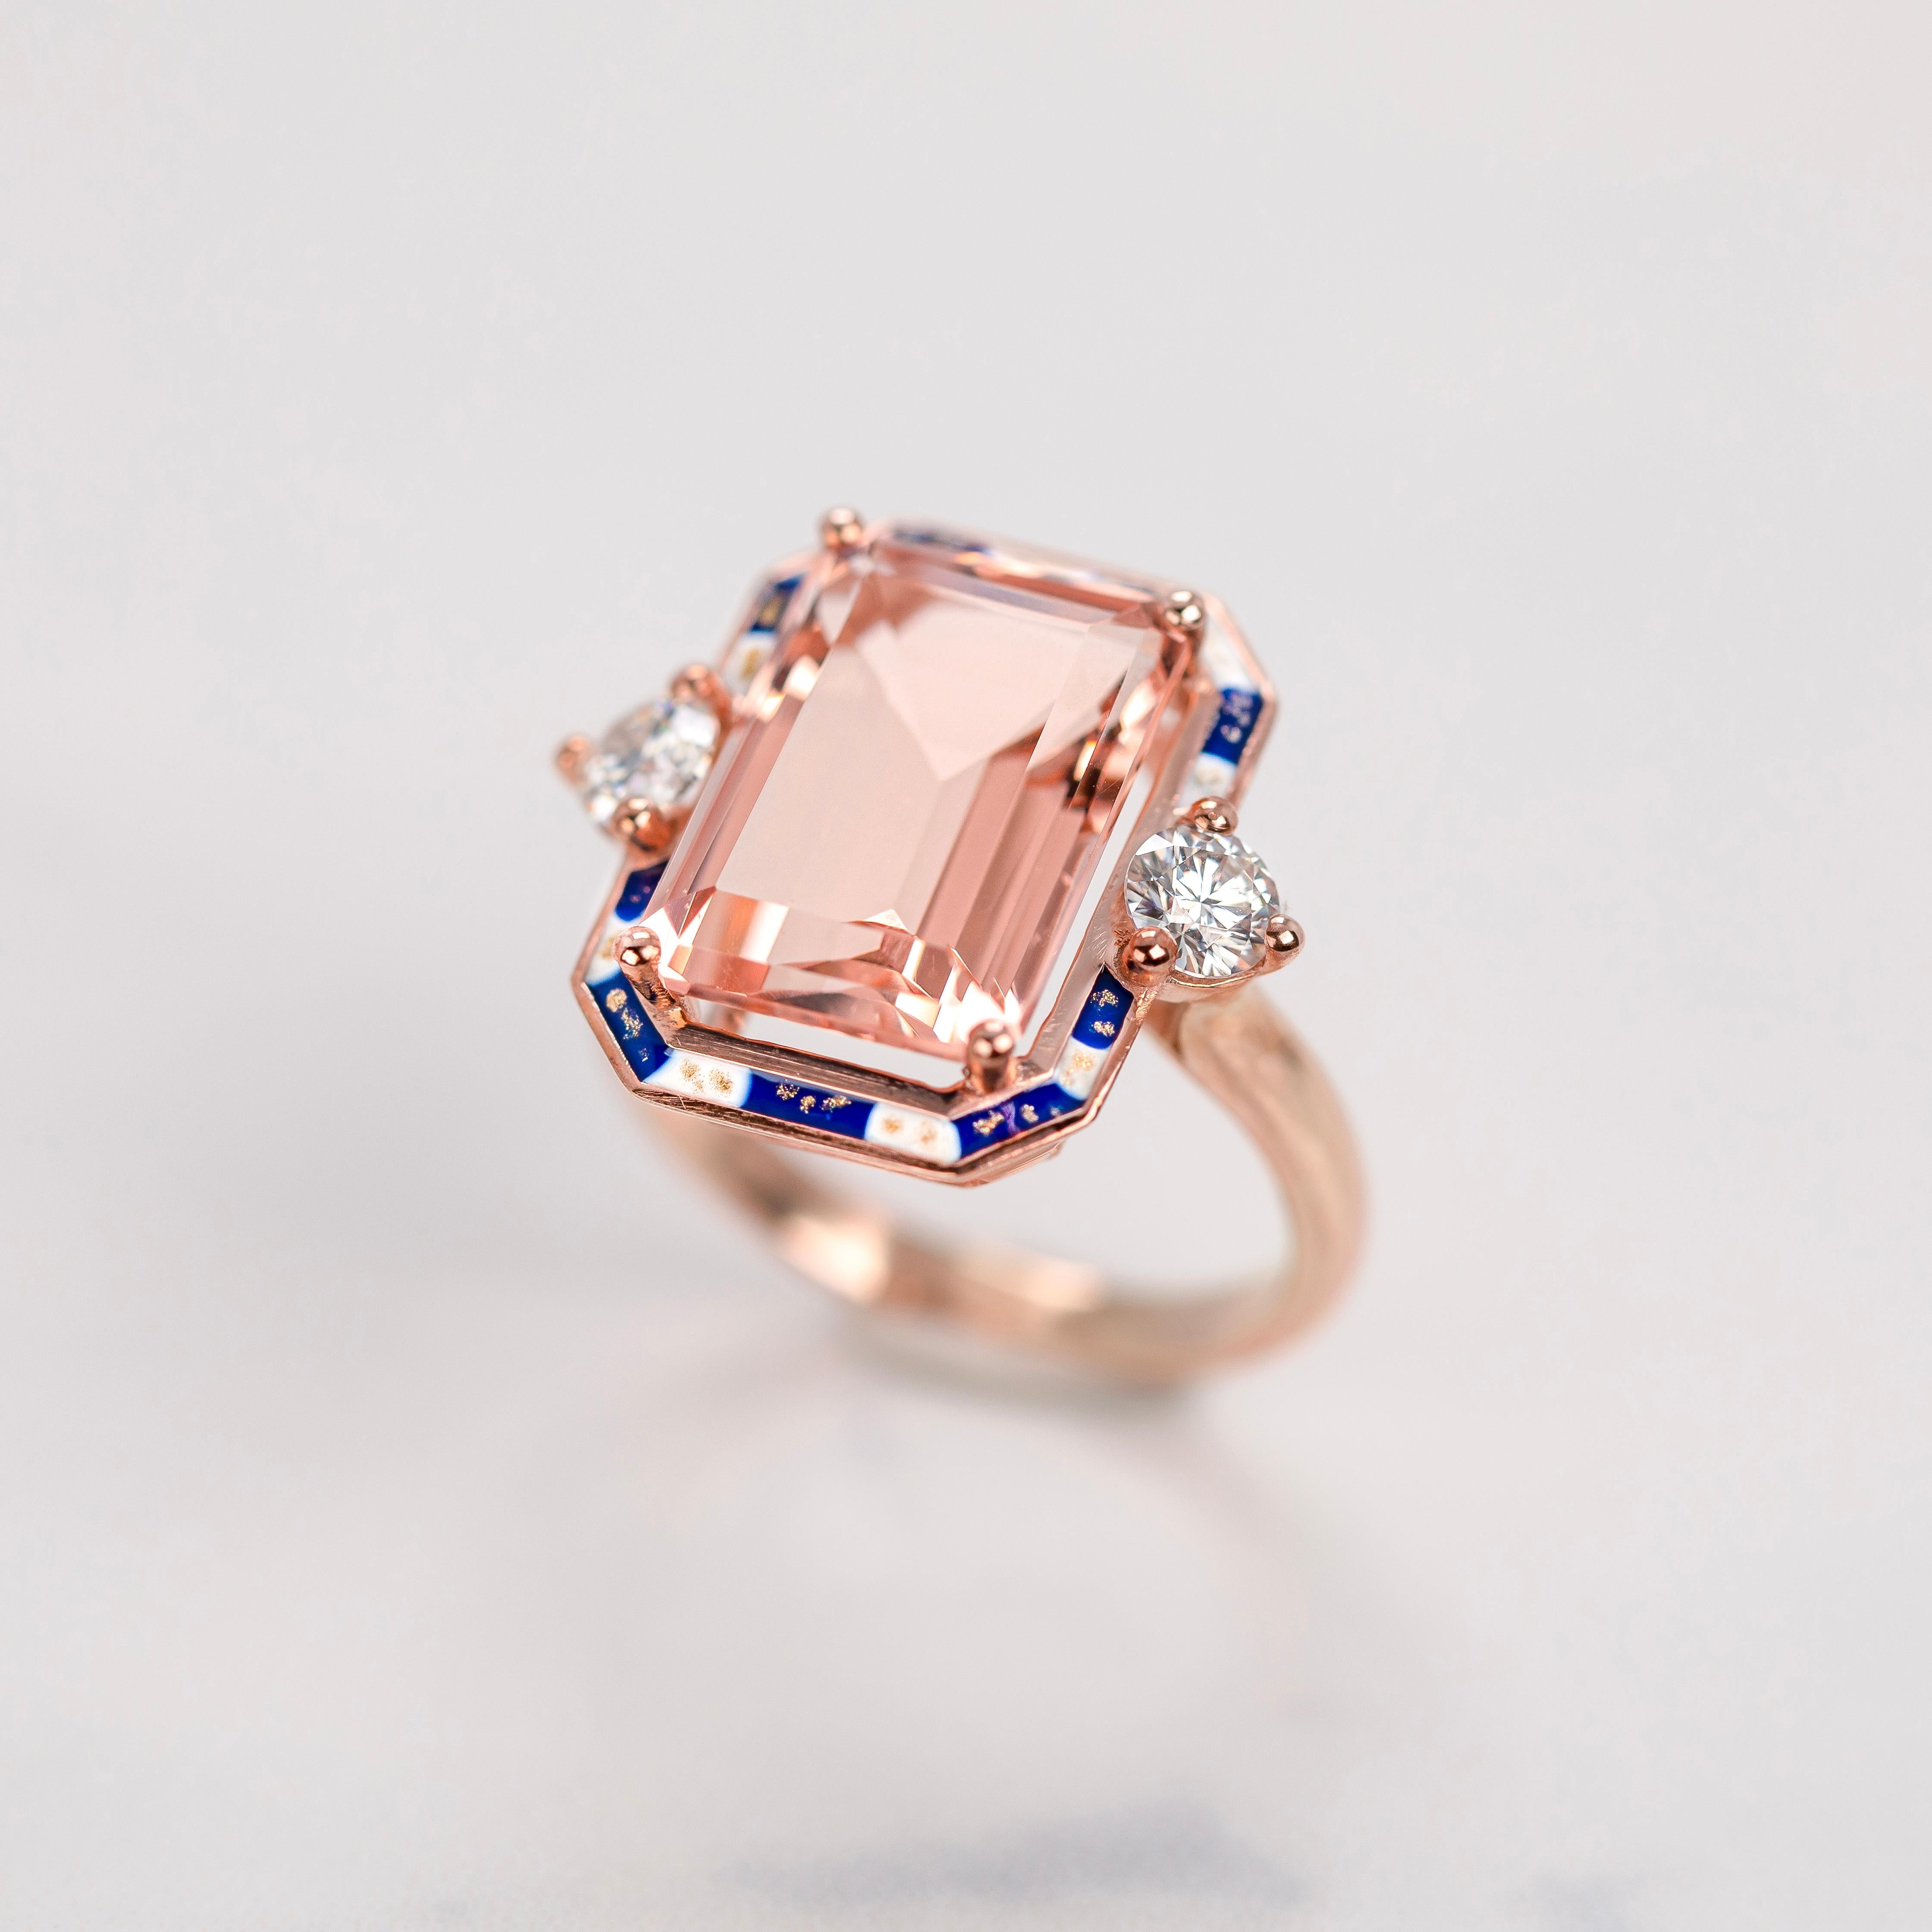 Emerald Cut Art Deco Style, Pink Quartz and Moissanite Stone Ring, 14K Gold Ring For Sale